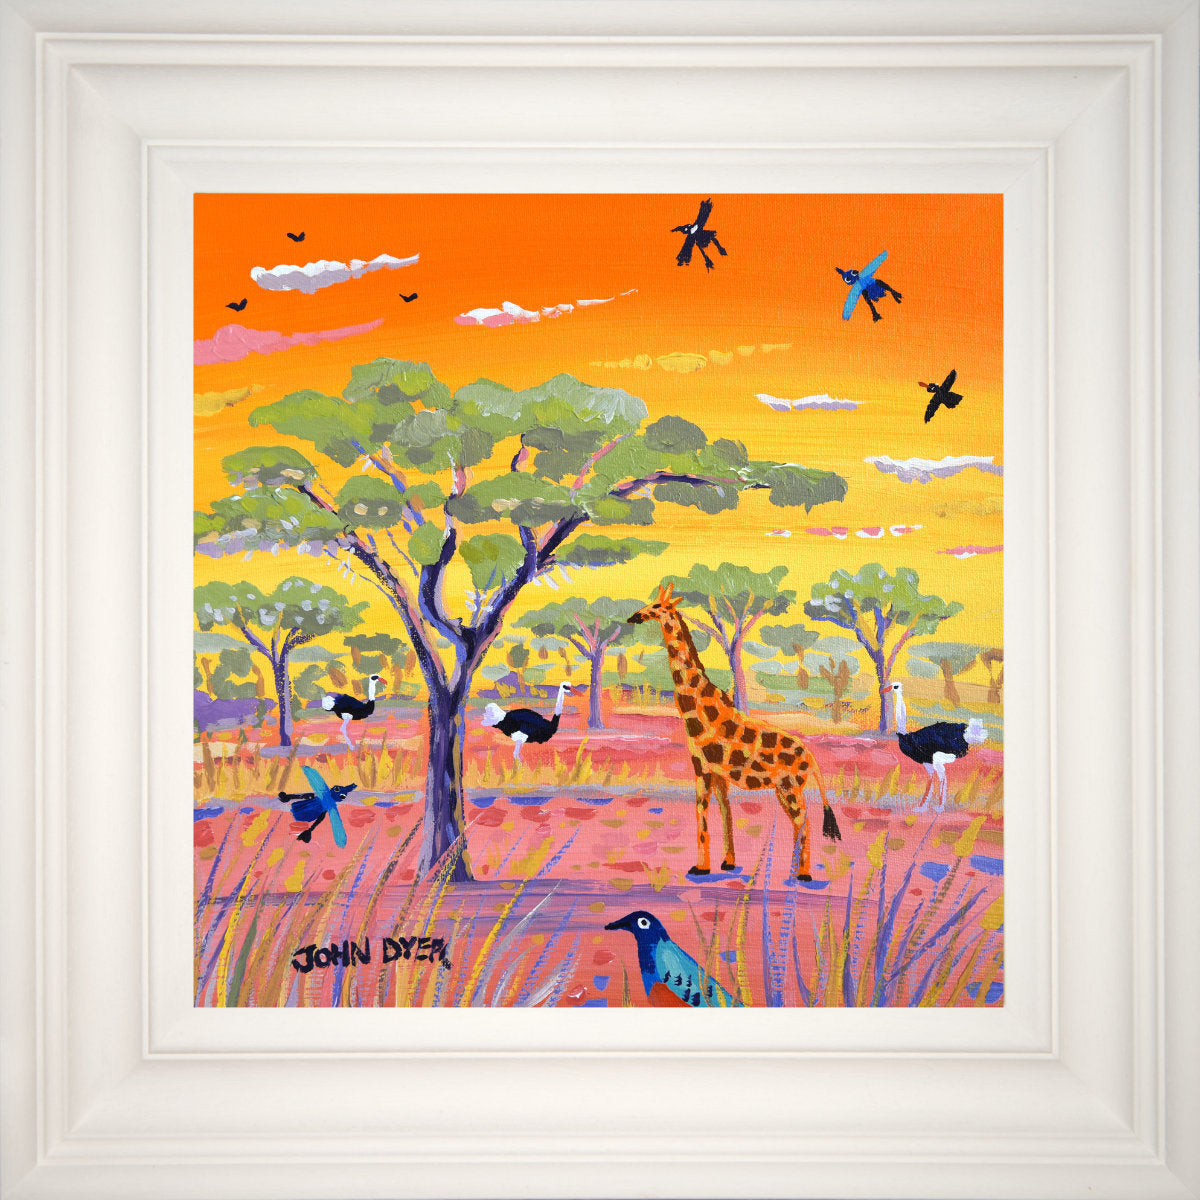 'Precious Africa', 12x12 inches acrylic on canvas. Paintings of Africa by British Artist John Dyer.